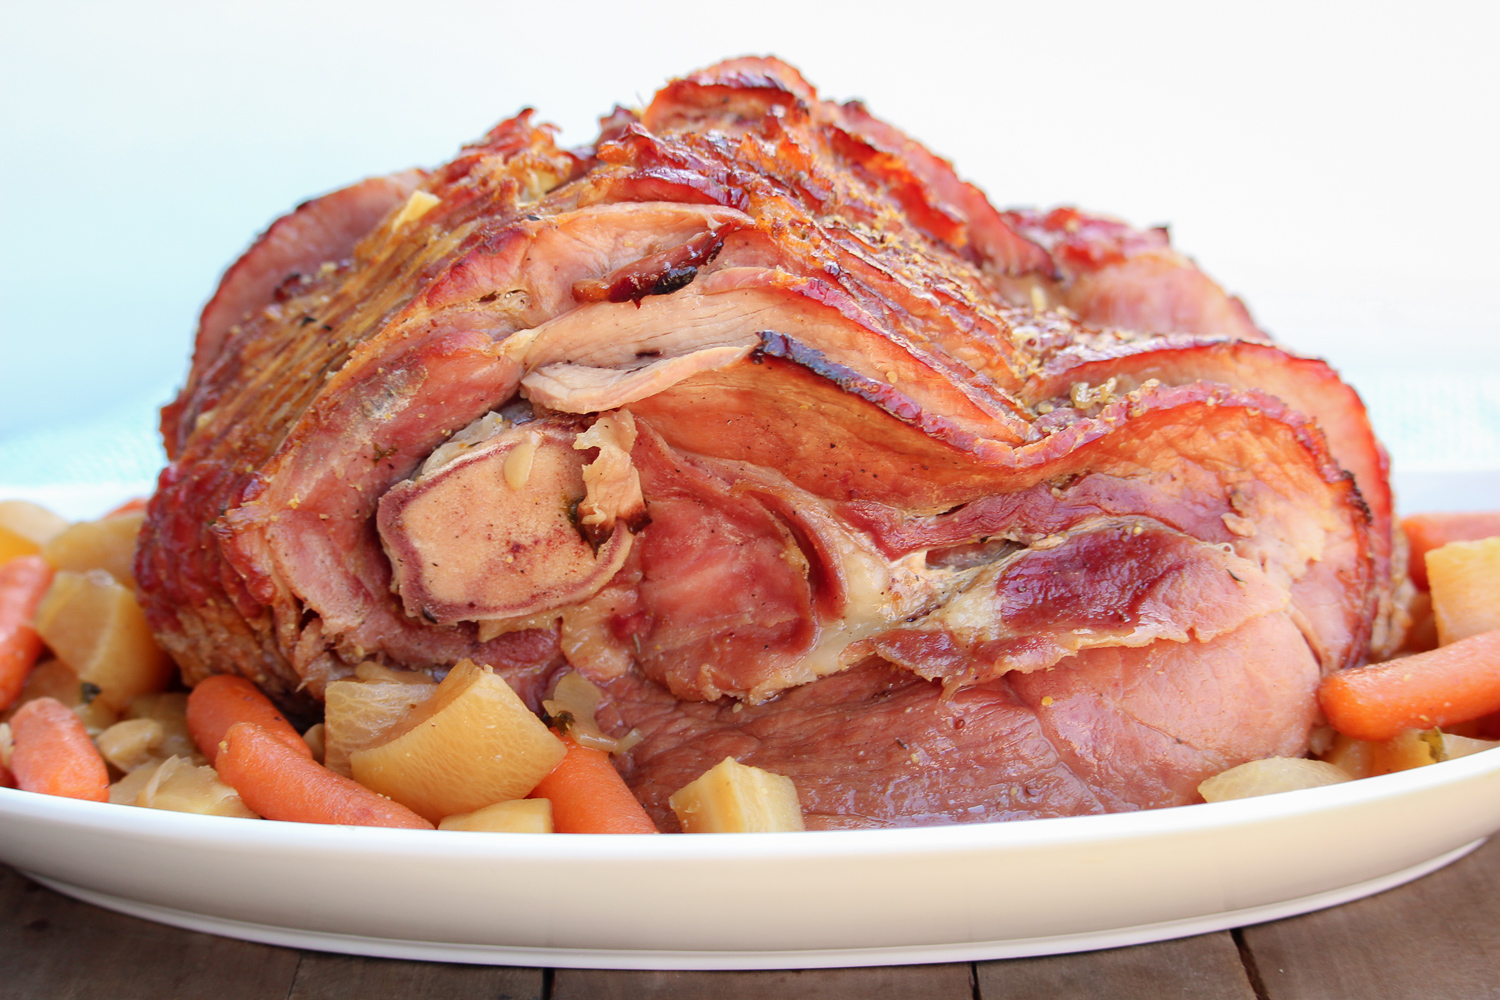 Ham and vegetables on a white plate ready to serve.